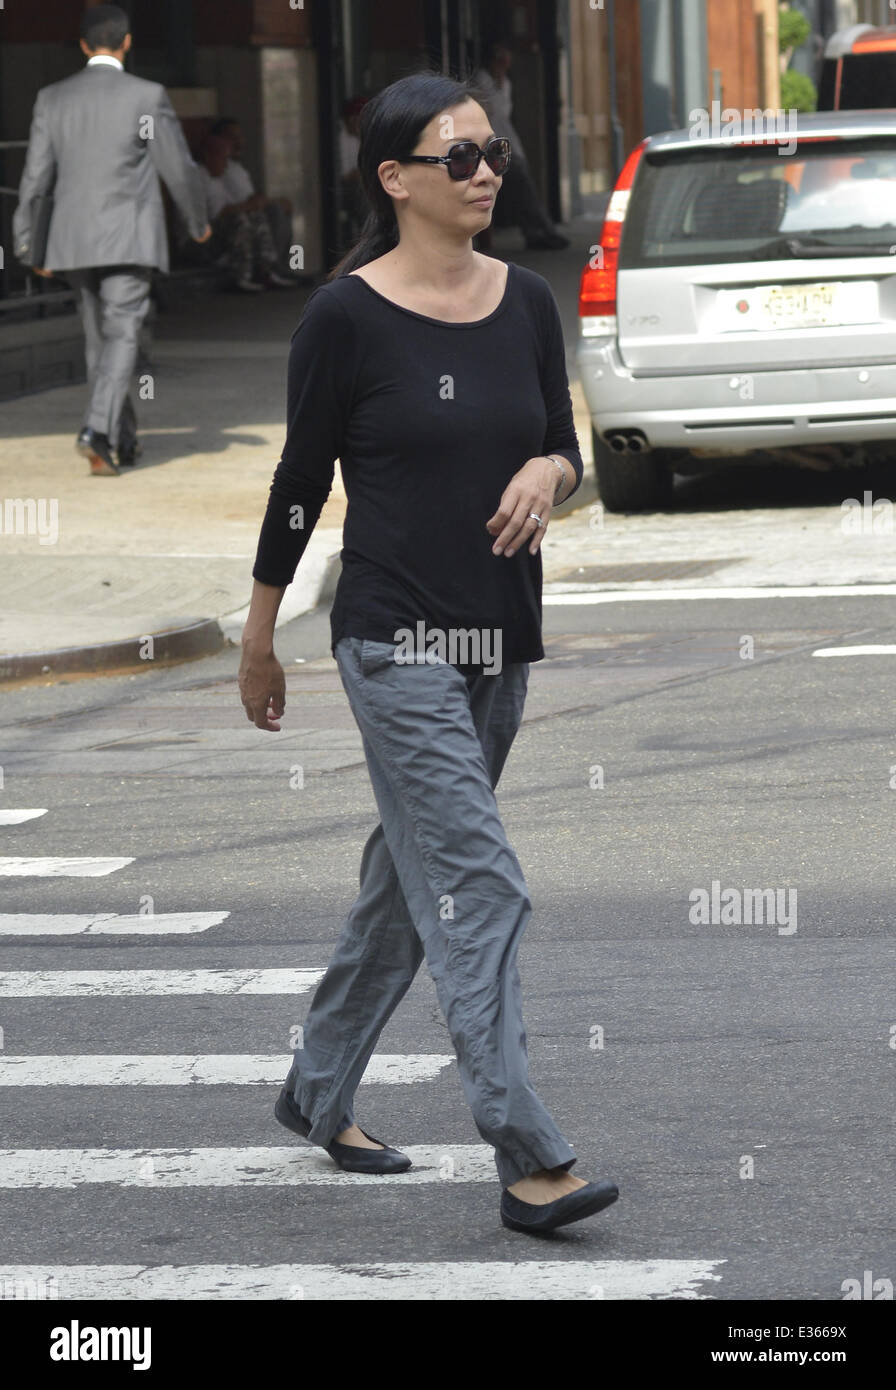 James Gandolfini's wife Deborah Lin spotted taking a stroll with 9-month old daughter Liliana  Featuring: Deborah Lin,Liliana Gandolfini Where: New York City, NY, United States When: 11 Jul 2013 Stock Photo